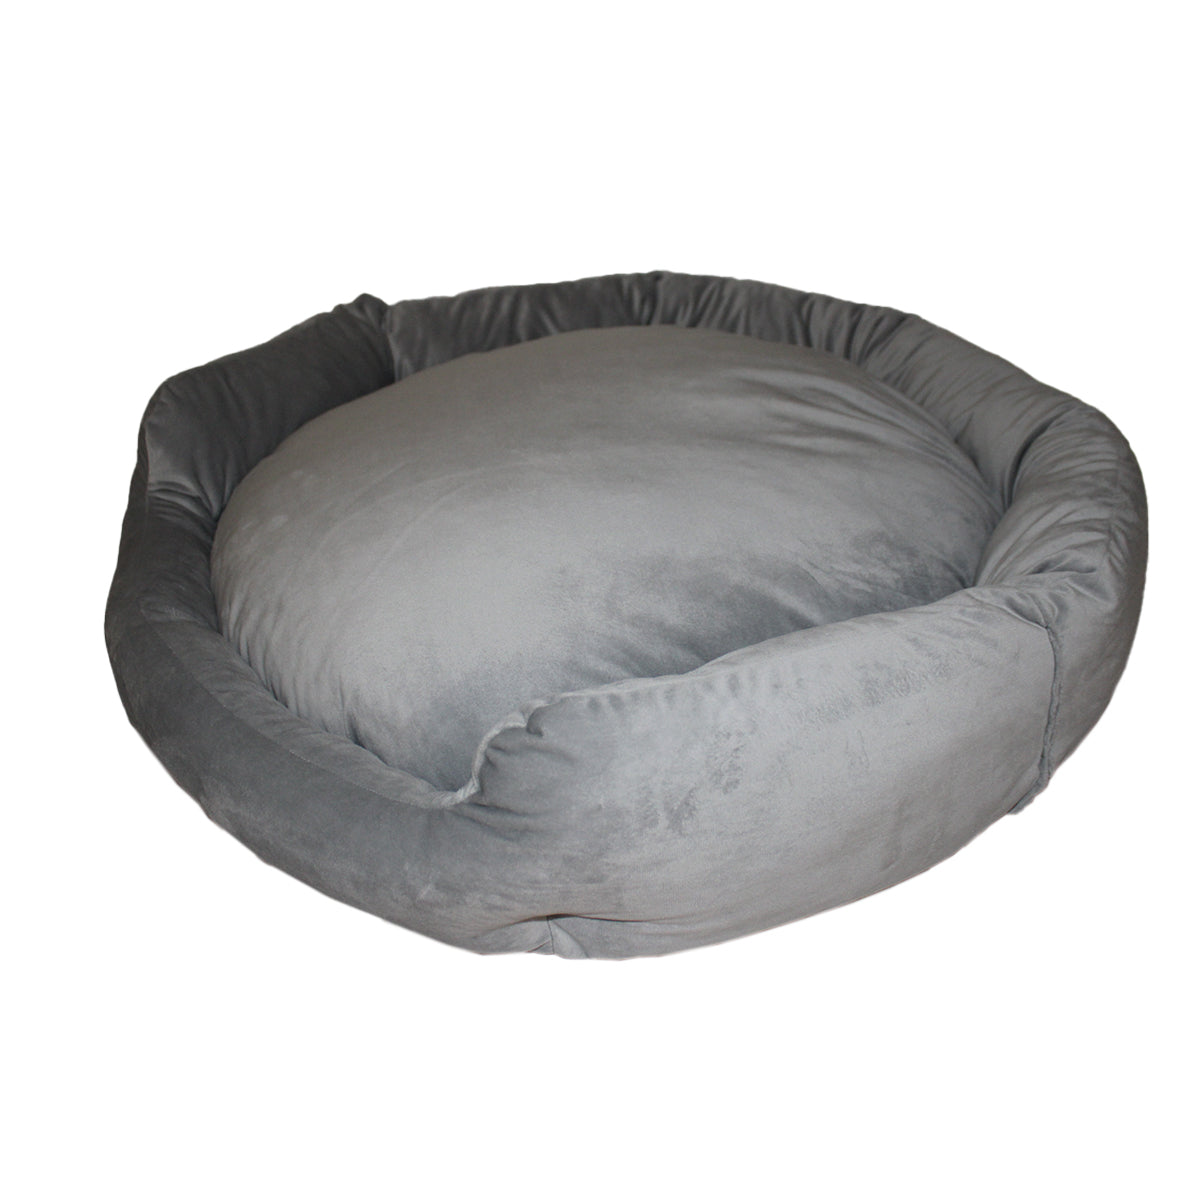 ROUND BED WITH LARGE REMOVABLE CUSHION 9644 